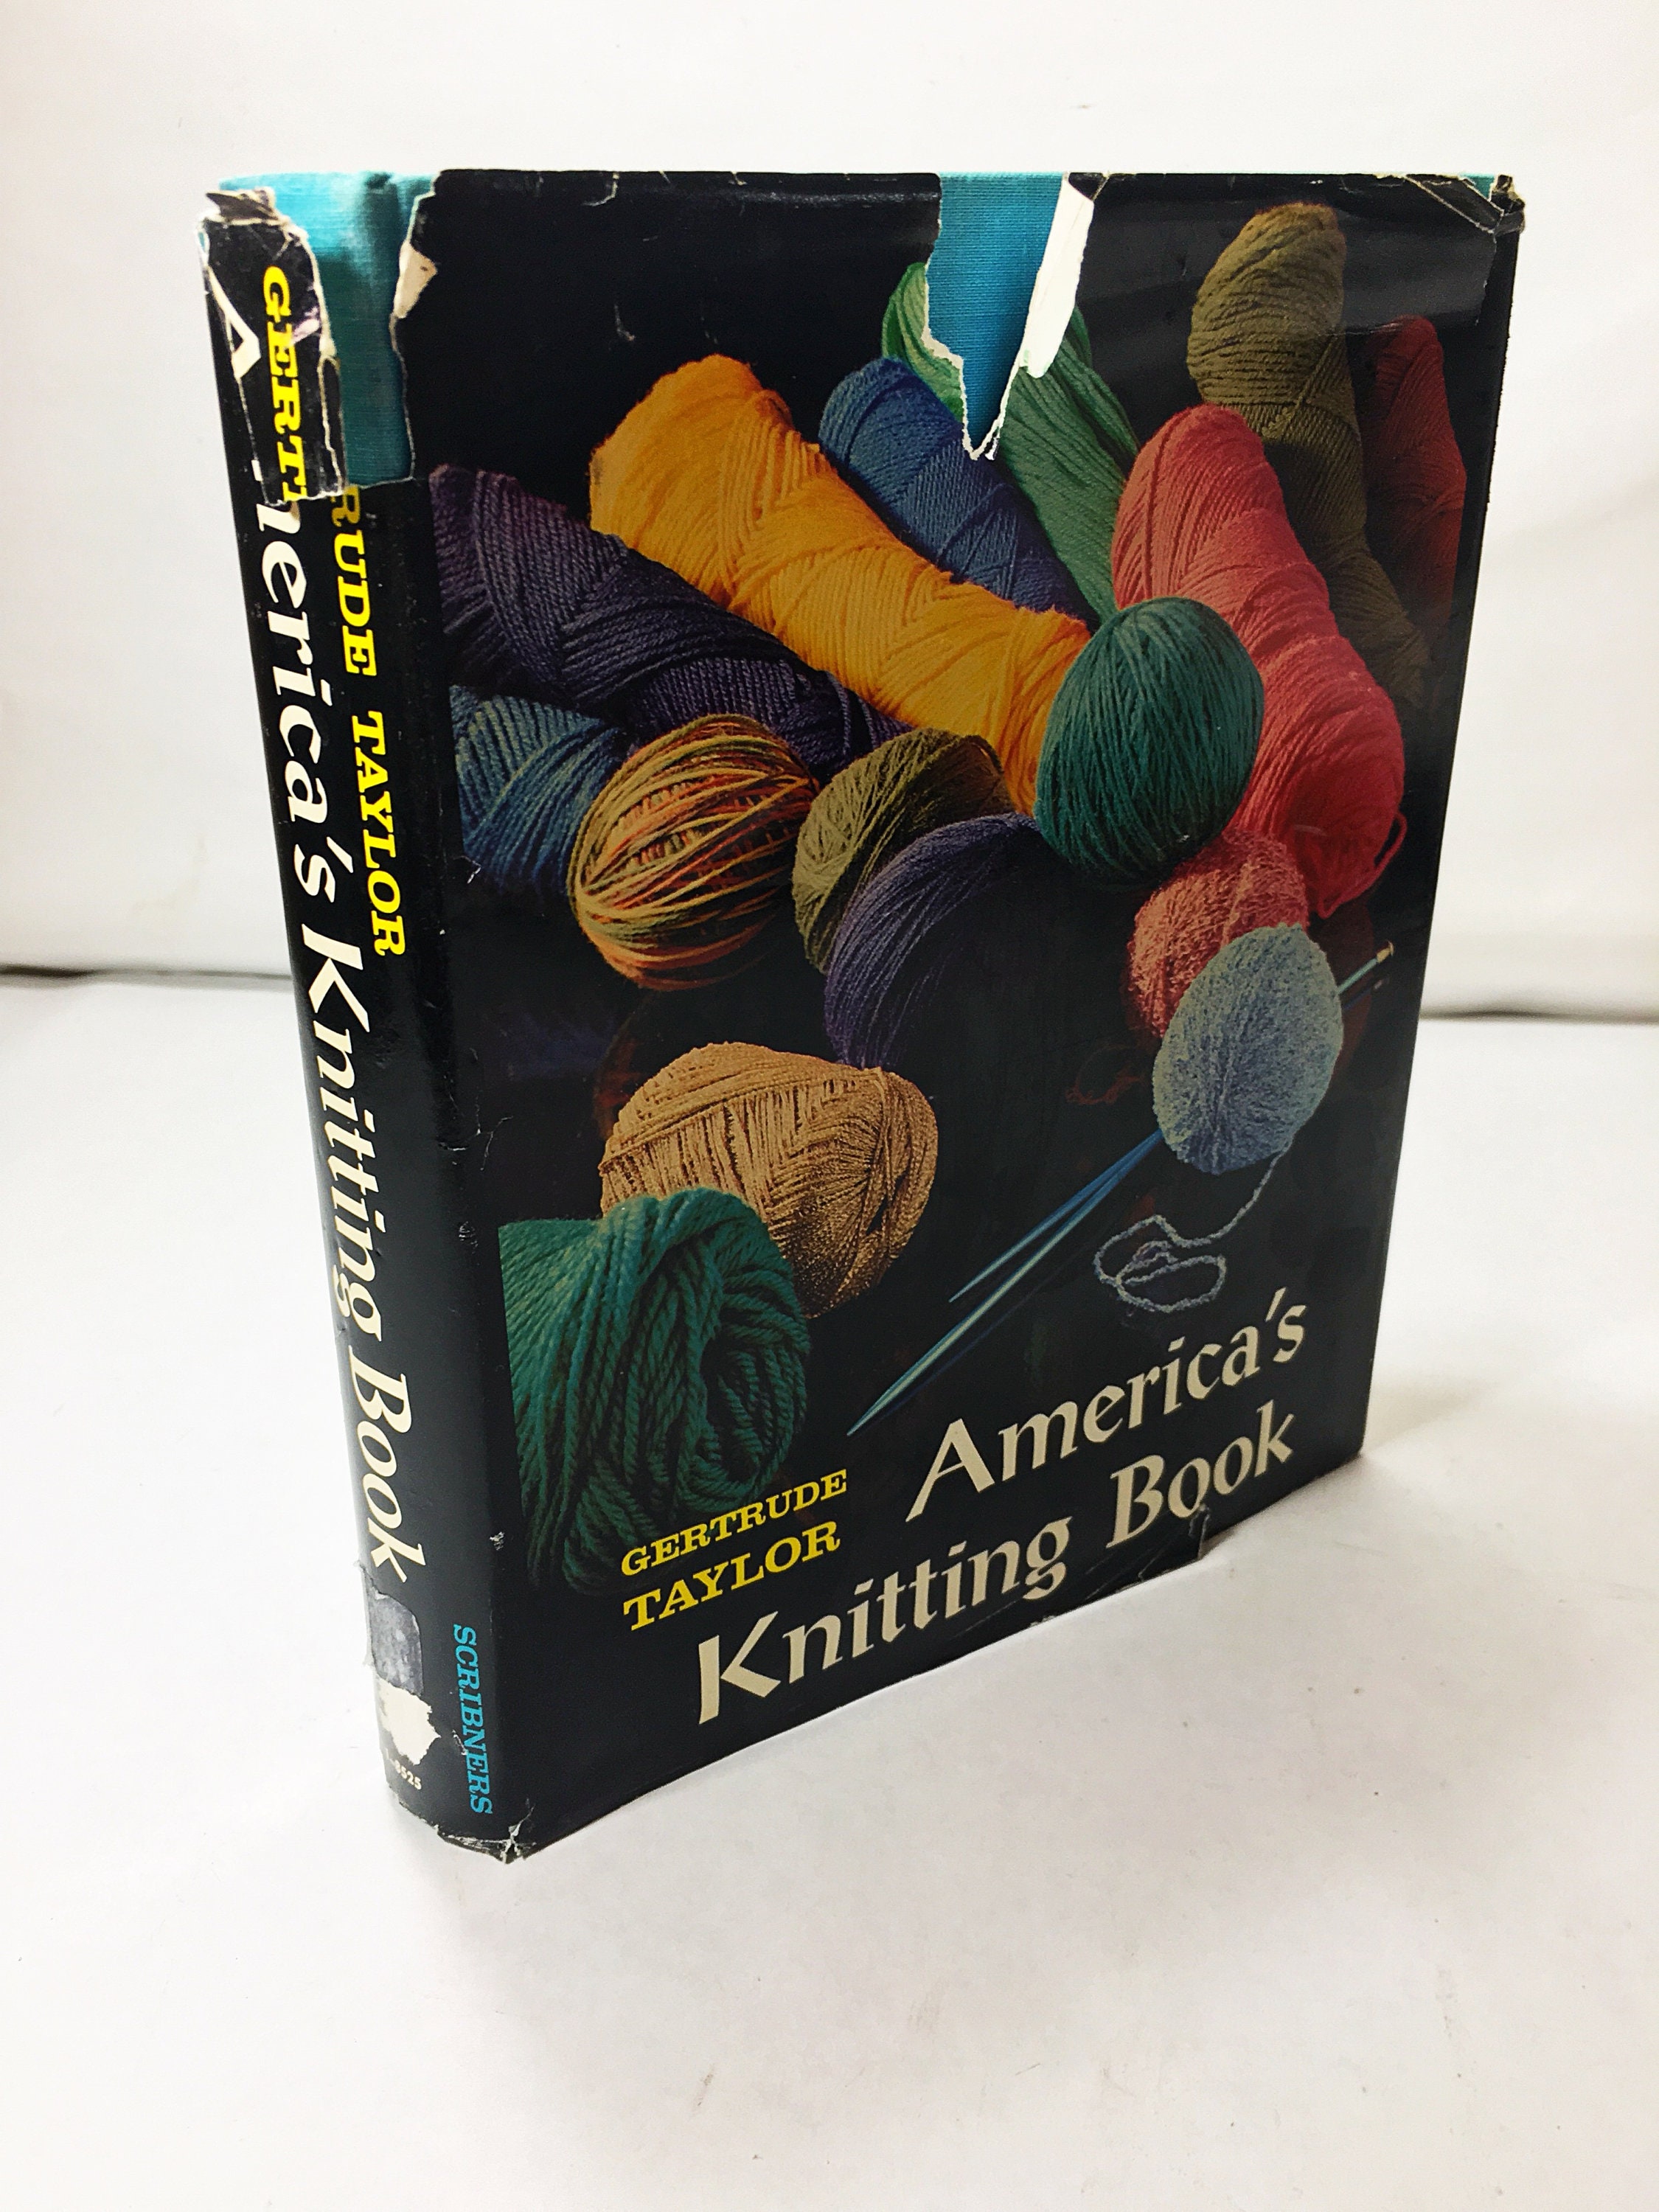 America's Knitting Book by Gertrude Taylor - Hardcover